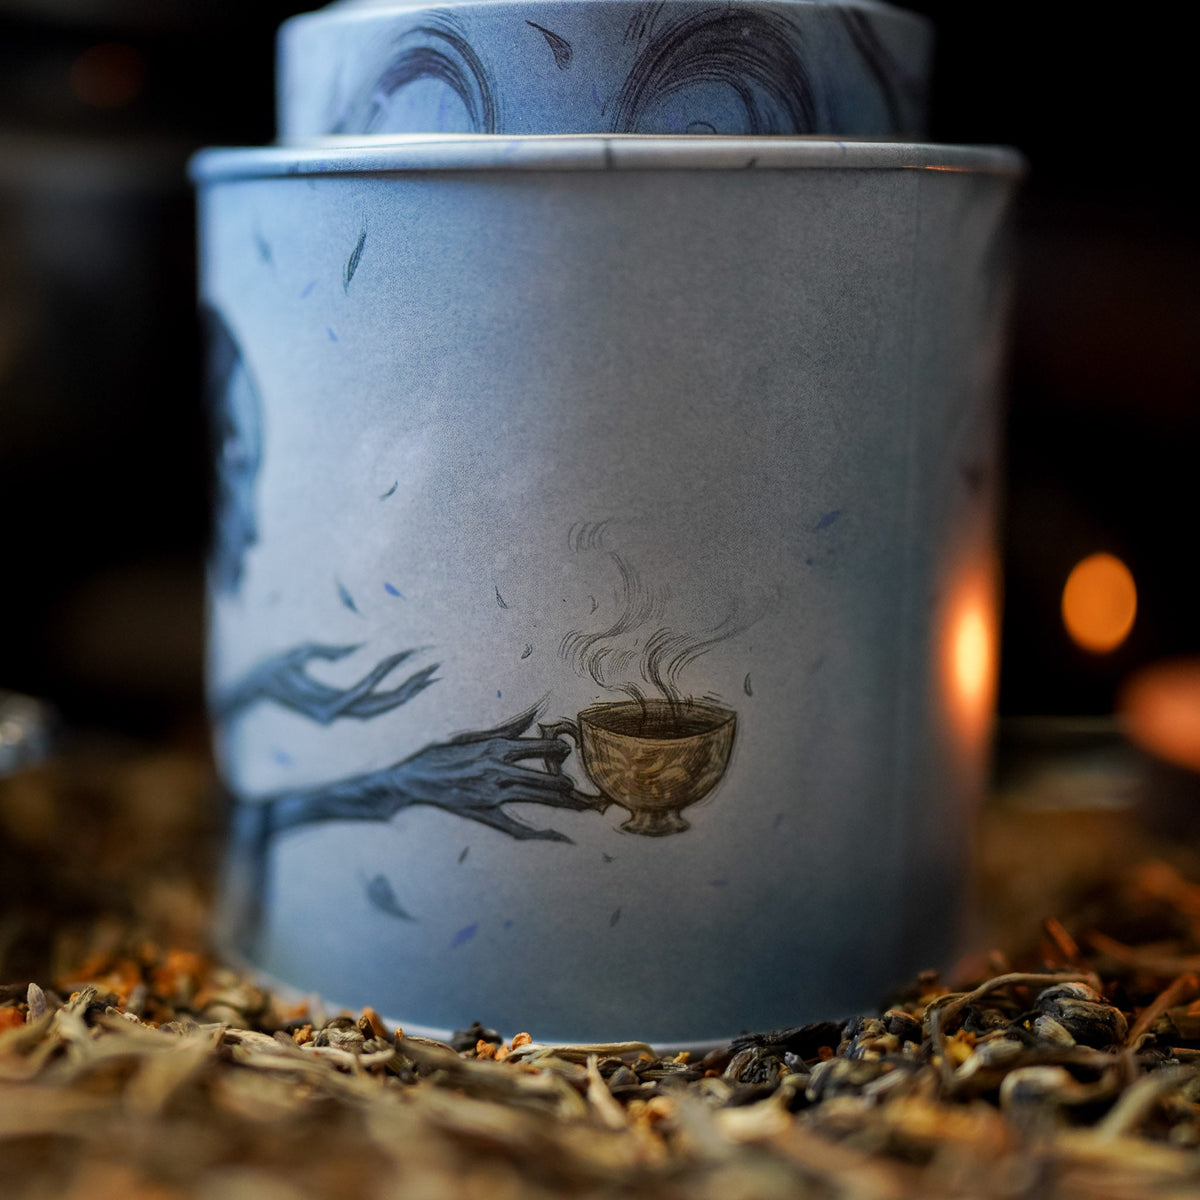 Suriel Tea Company Tin in blue and gray with a black Suriel from ACOTAR spilling the tea from a golden teacup.